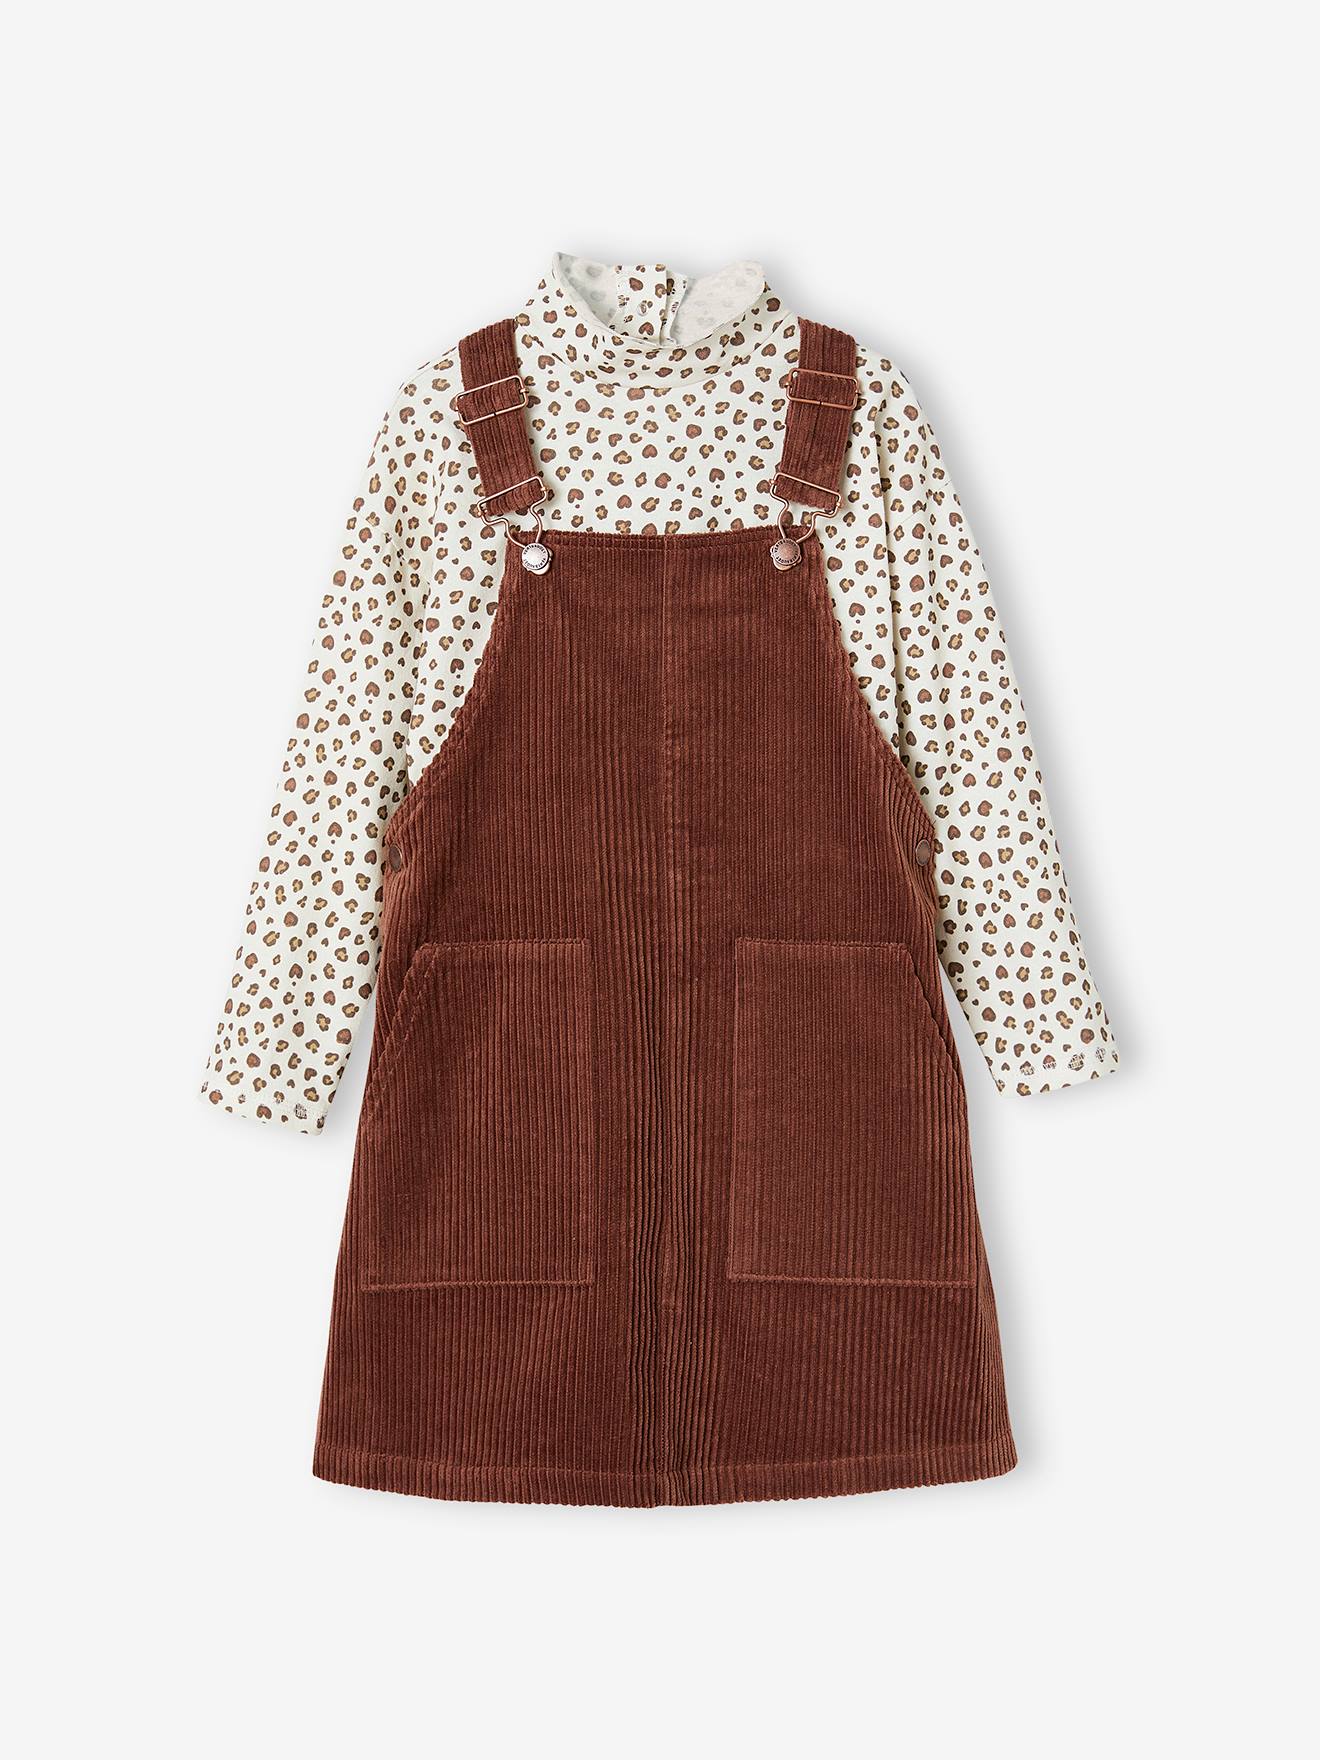 Top + Corduroy Dungaree Dress Outfit for Girls - chocolate